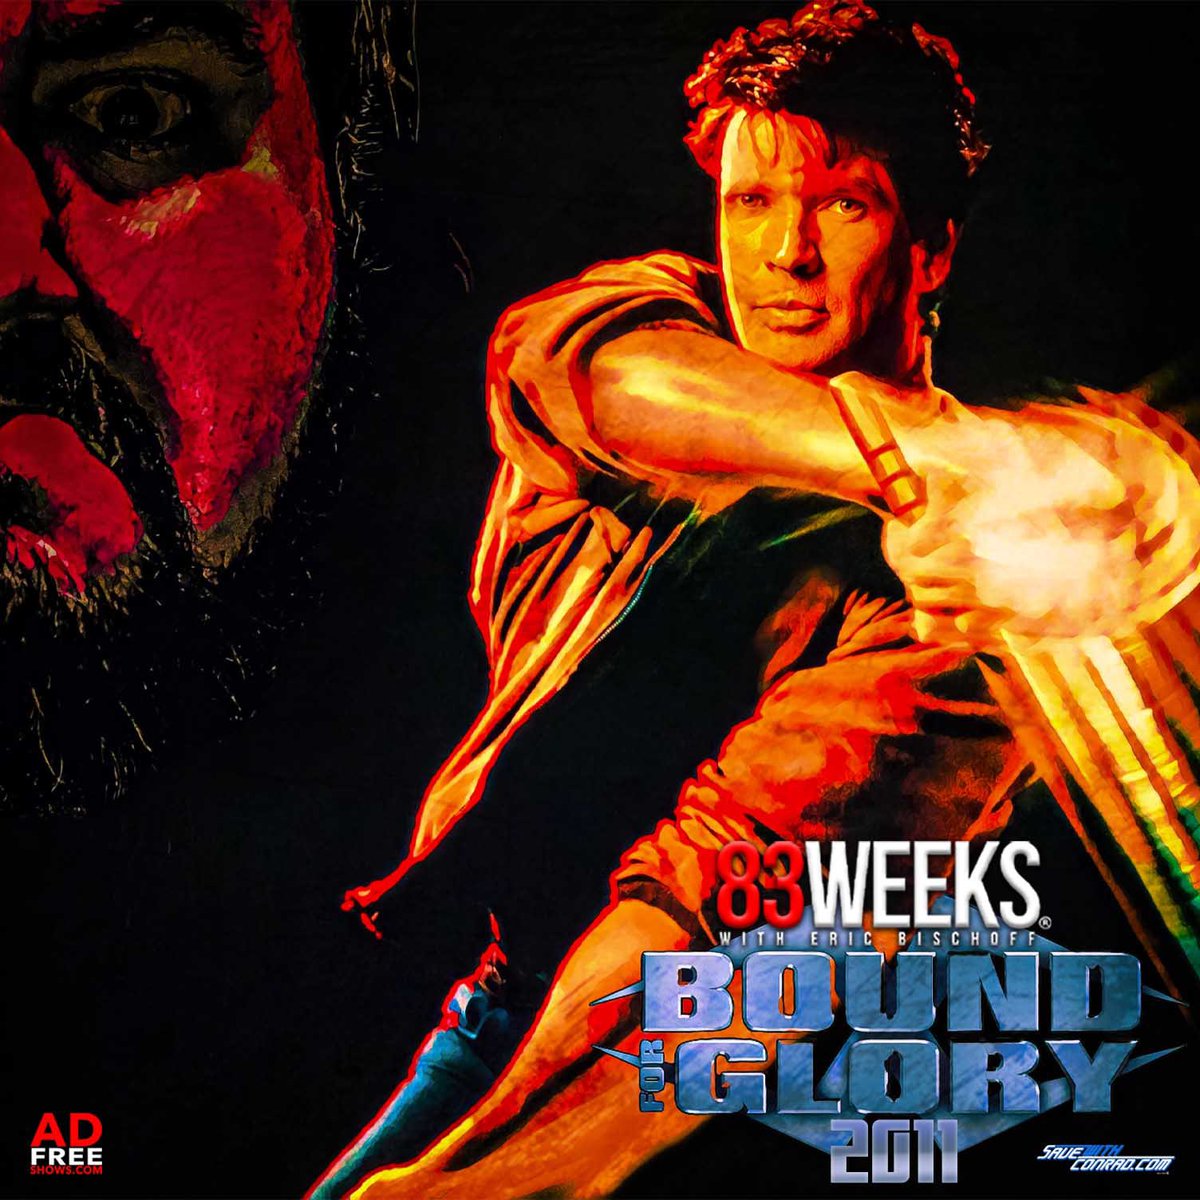 It’s time for #83Weeks!

We revisit TNA #BoundForGlory 2011! We’ll see Hulk Hogan vs. Sting for control of #TNA w/Garett Bischoff as special ref! Also Hulk's physical condition, Micro Championship Wrestling, Jeff Hardy's drug angle, Bruce Prichard as Head of Creative + more! https://t.co/UhYyZU6Hjc